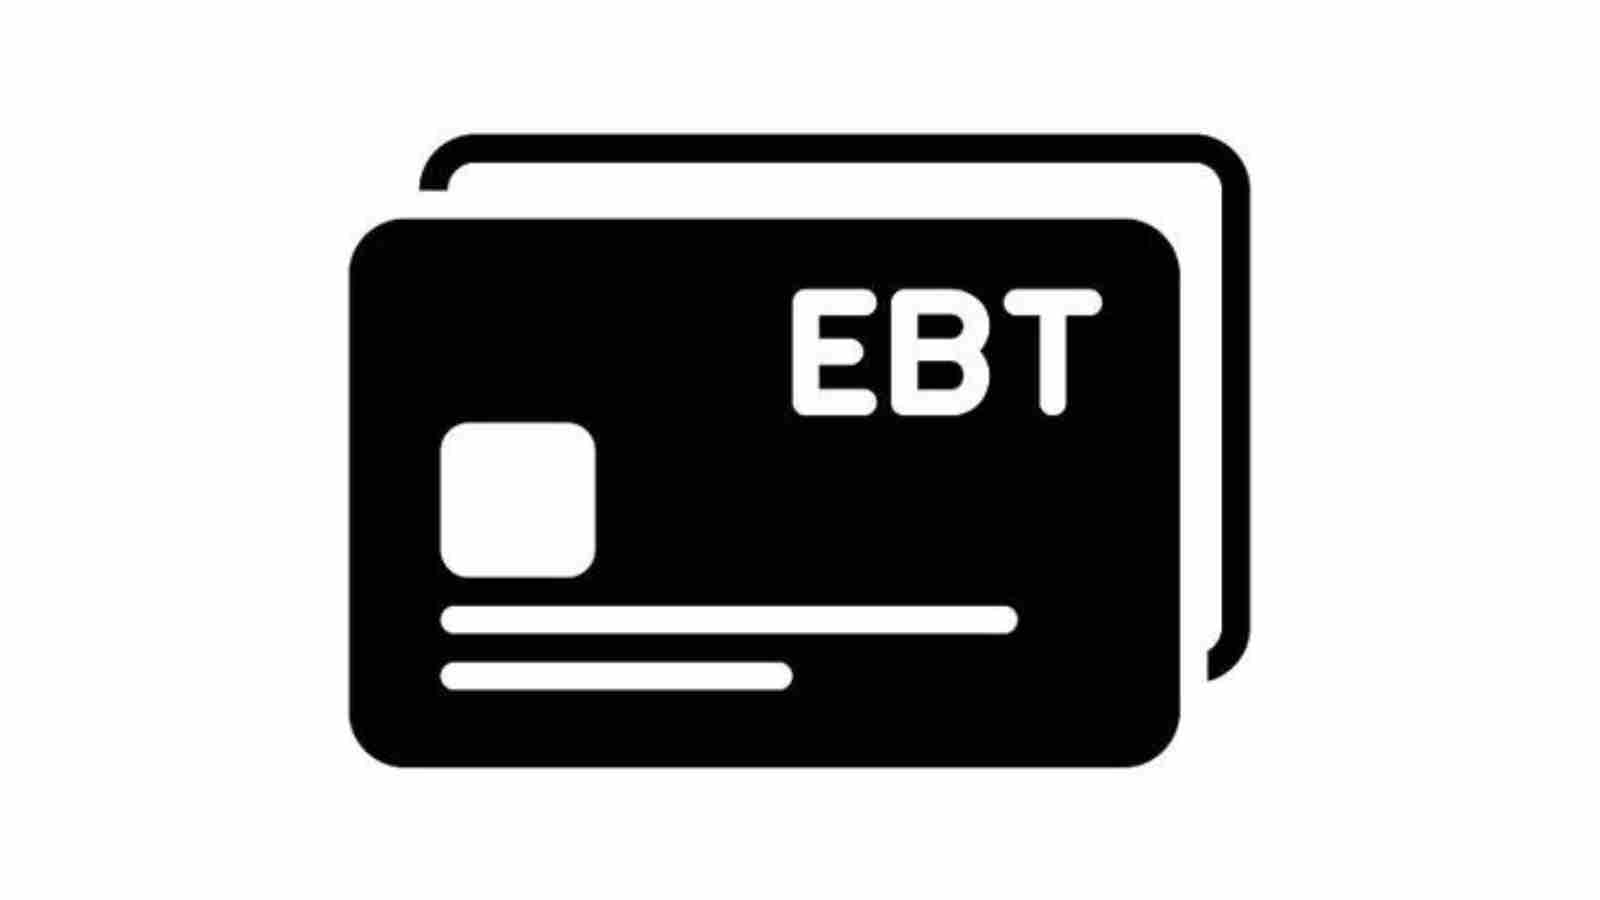 EBT Card: How to get Amazon Prime for $6.99 with your EBT card?